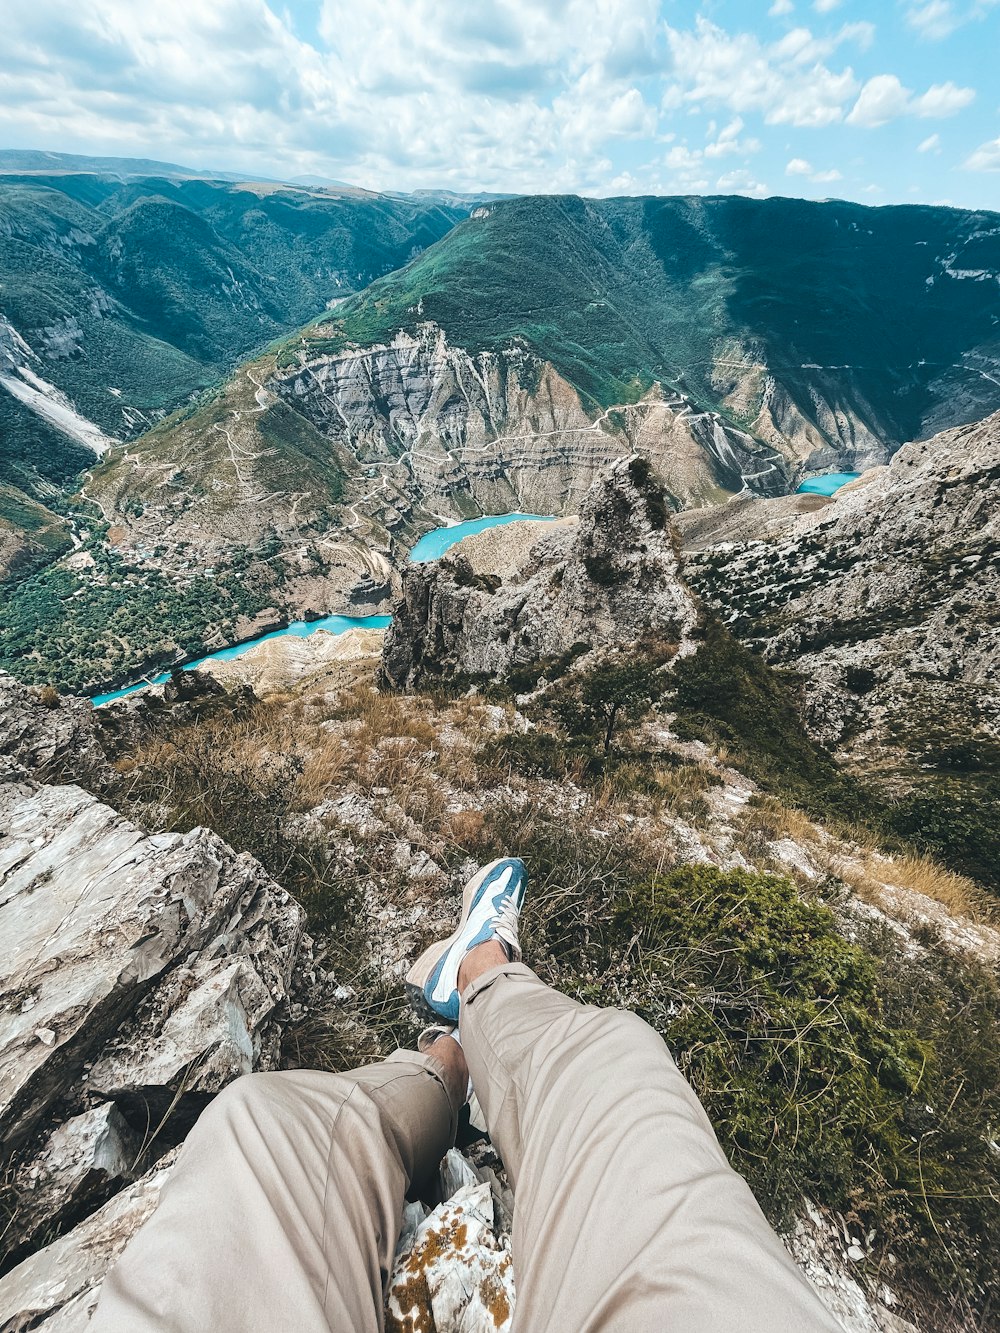 a person sitting on a rock overlooking a valley with a river running through it